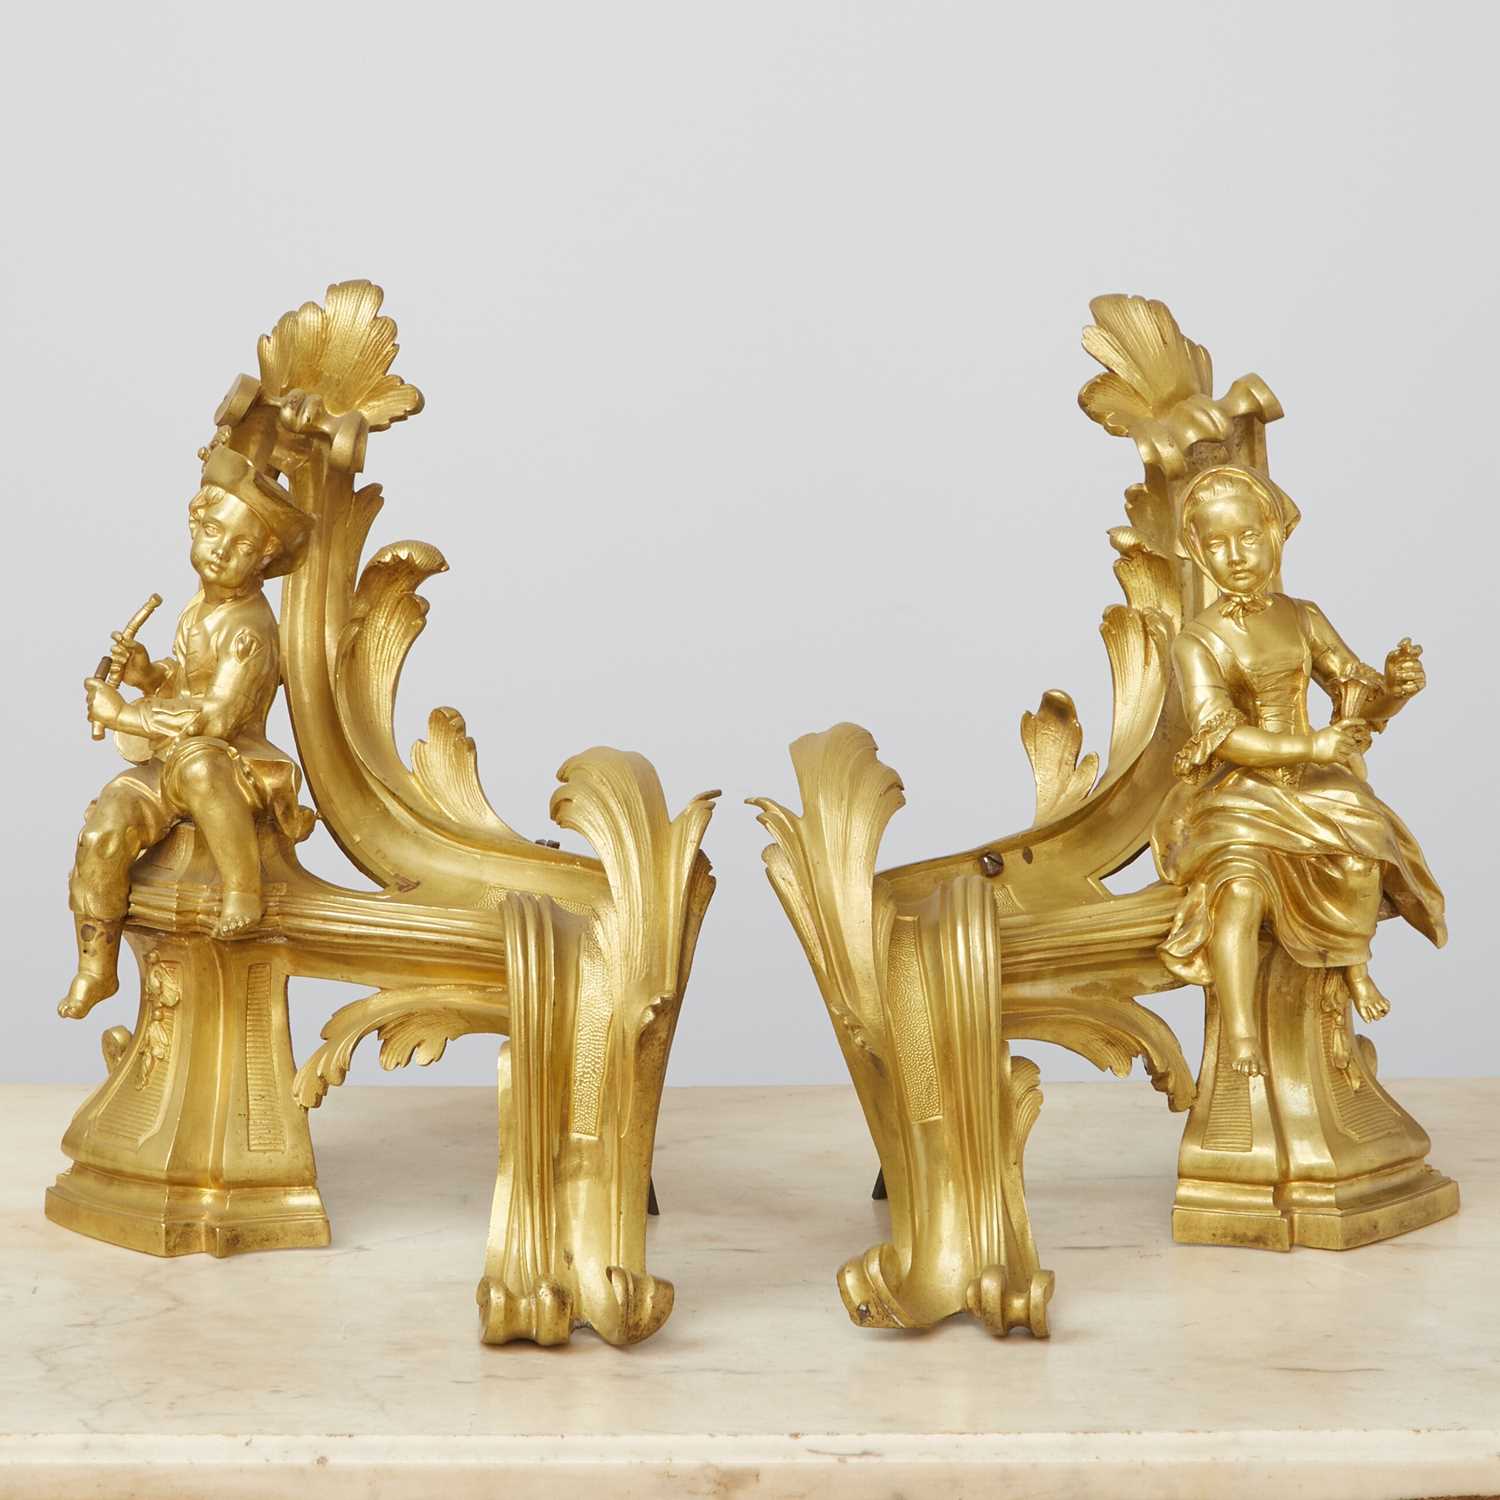 Lot 80 - Pair of Louis XV Style Gilt Bronze Figural Chenets